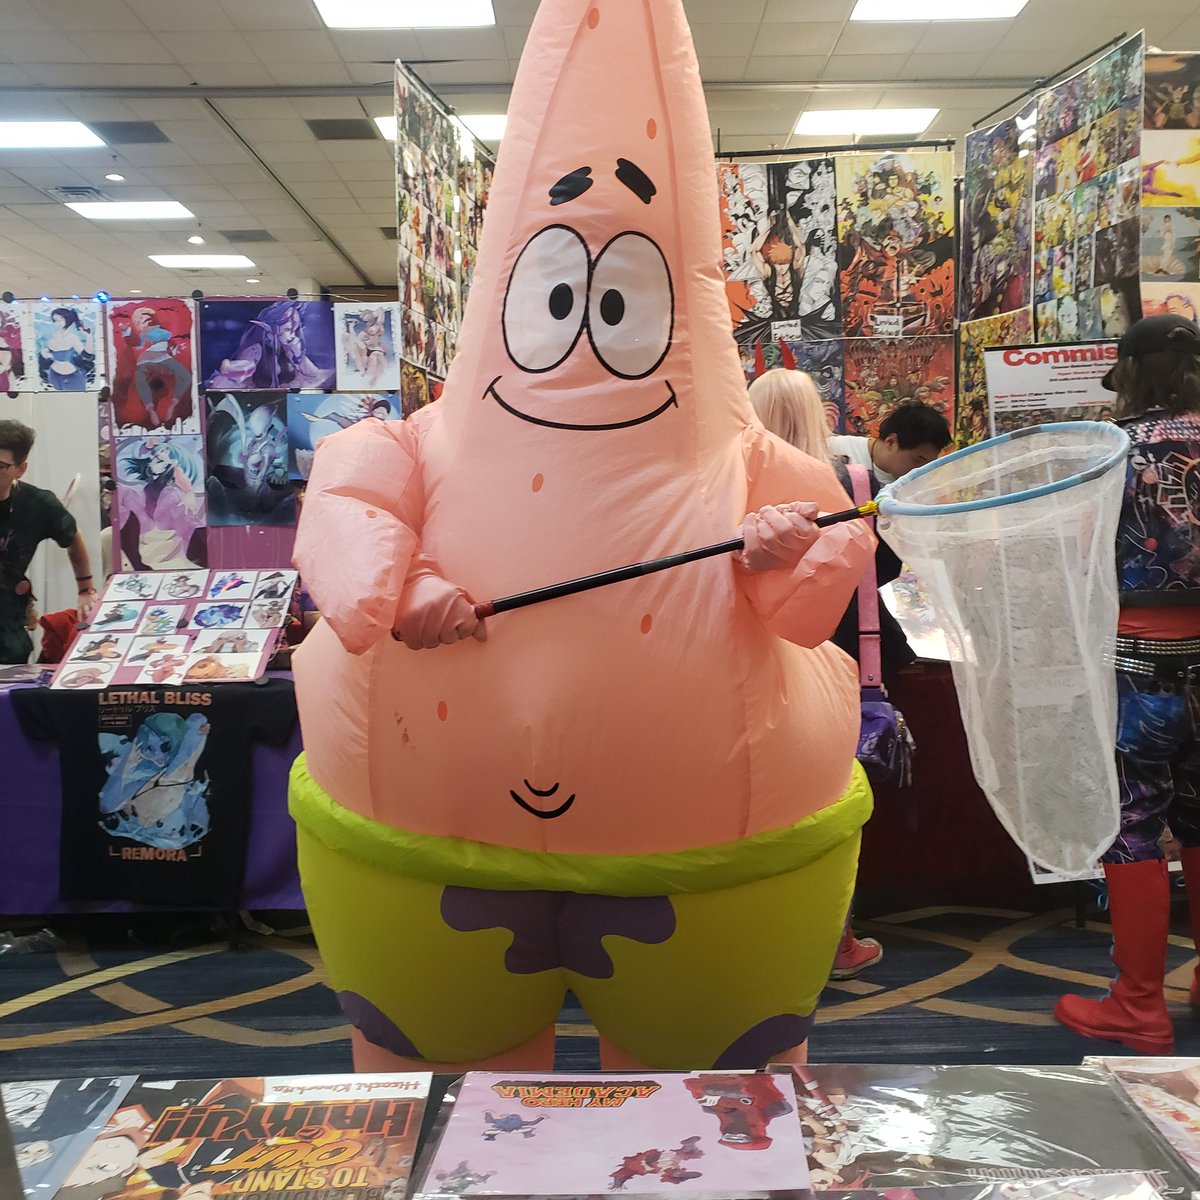 Thanks for stopping by @TsumiCon Patrick!